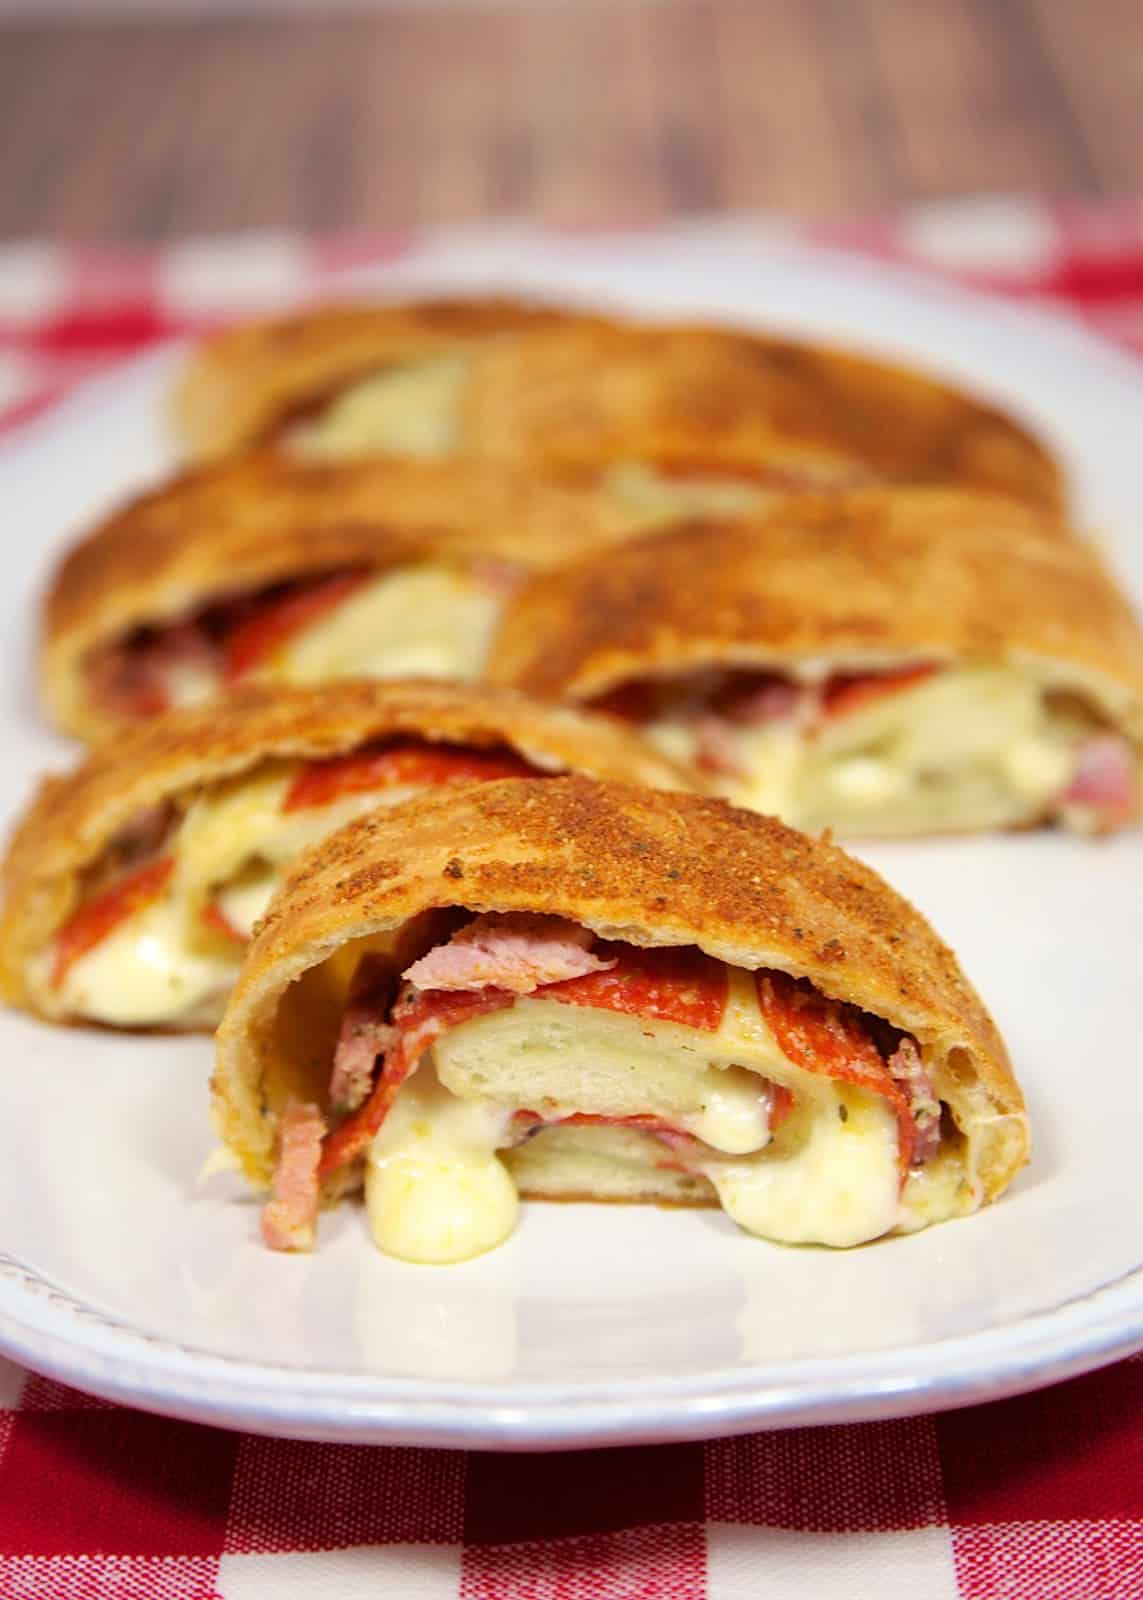 Garlic Butter Stromboli - pizza dough slathered with garlic butter and stuffed with pepperoni, ham and mozzarella. Serve with warm pizza sauce.